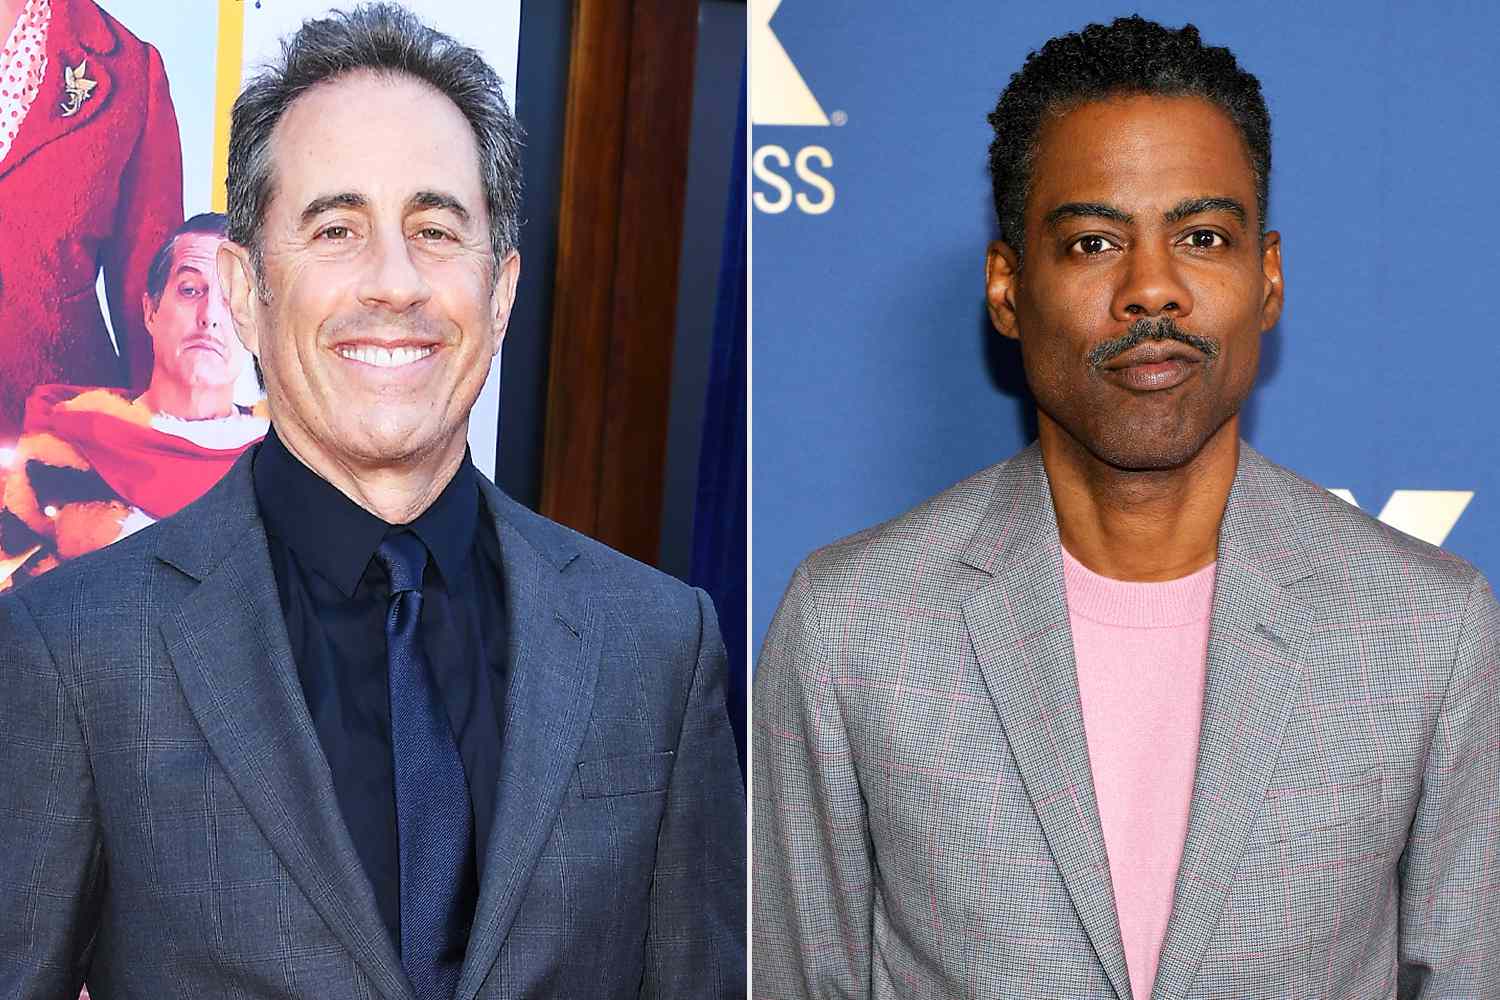 Jerry Seinfeld Asked Chris Rock to Parody His Will Smith Slap in “Unfrosted”,“ ”But He Was Too 'Shook'